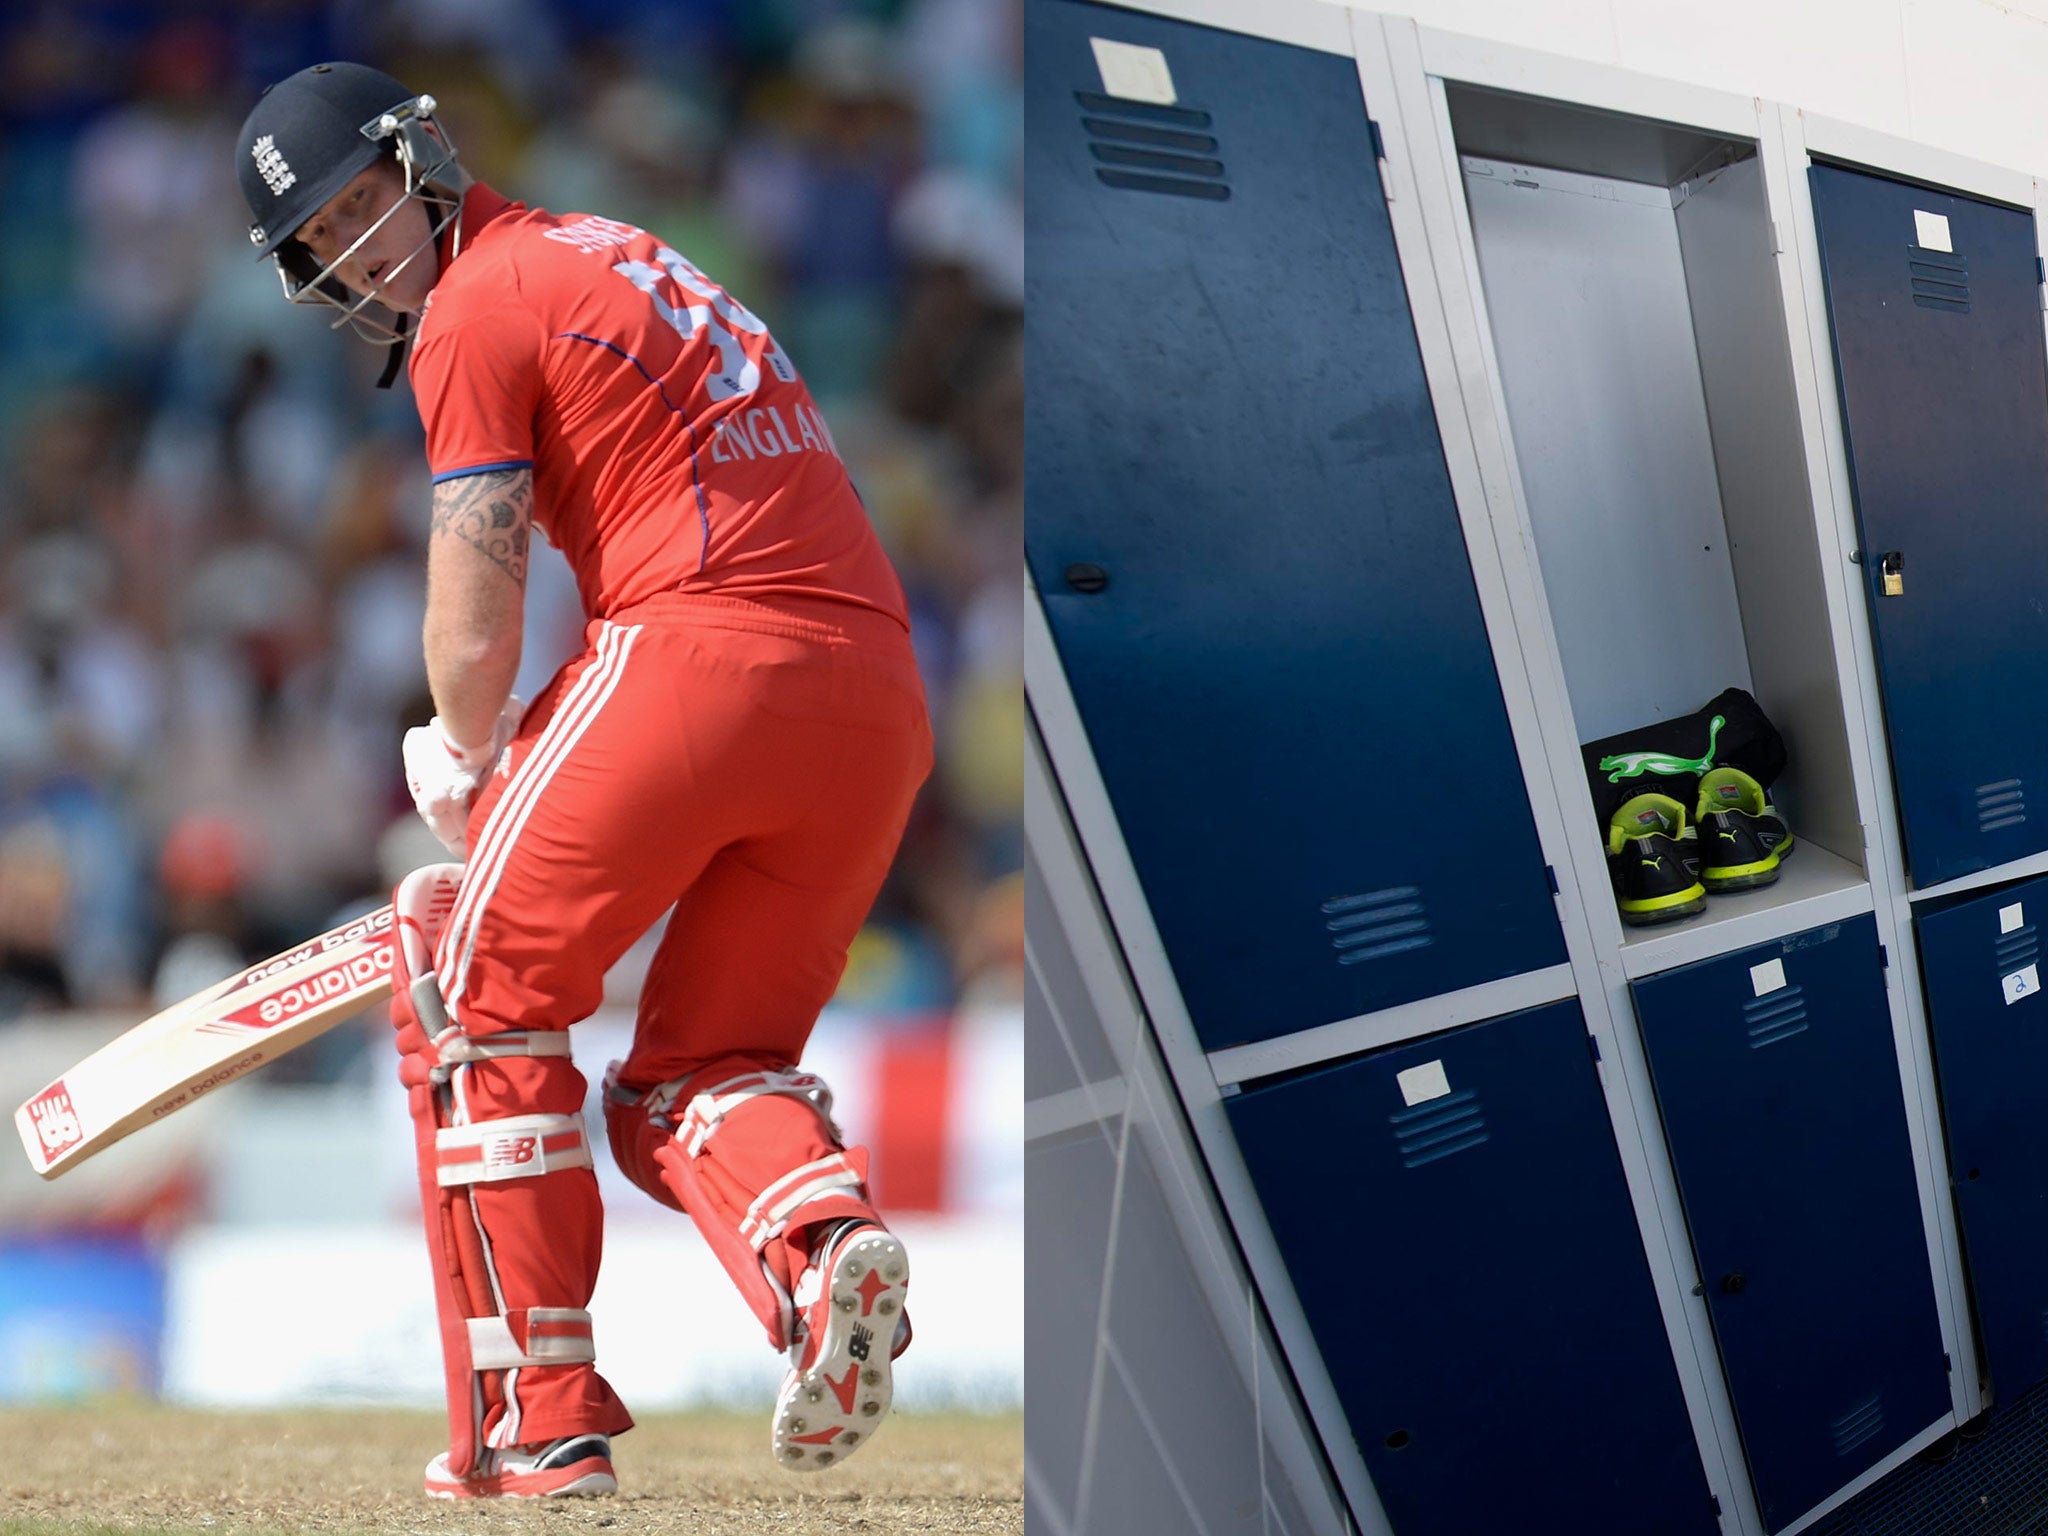 So frustrated was the England all-rounder after getting out against the West Indies, he punched a locker in the dressing room. He hit it with enough venom to fracture his hand and rule himself out of the World Twenty20.